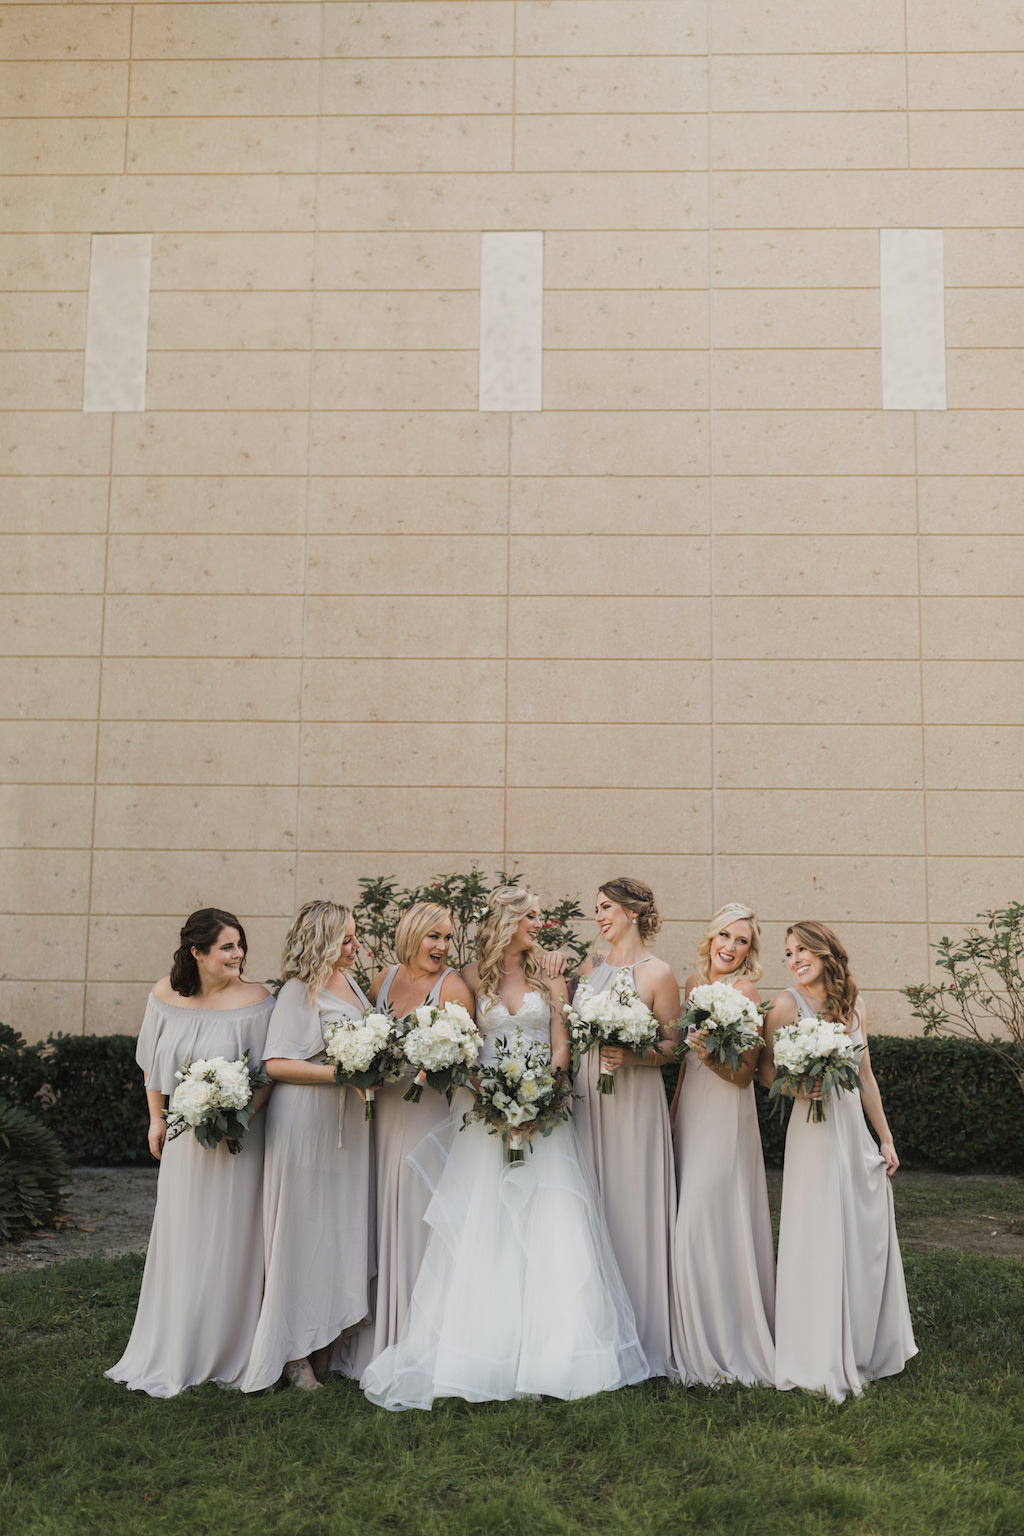 Florida Bride and Bridesmaids Wedding Portrait, Bride in Hayley Paige Chantelle Gown, Strapless Ivory Tulle Ball Gown with Corset Bodice, Bridesmaids in Beige Mismatched Style Long Dresses | Tampa Bay Wedding Hair and Makeup Artist Michele Renee the Studio